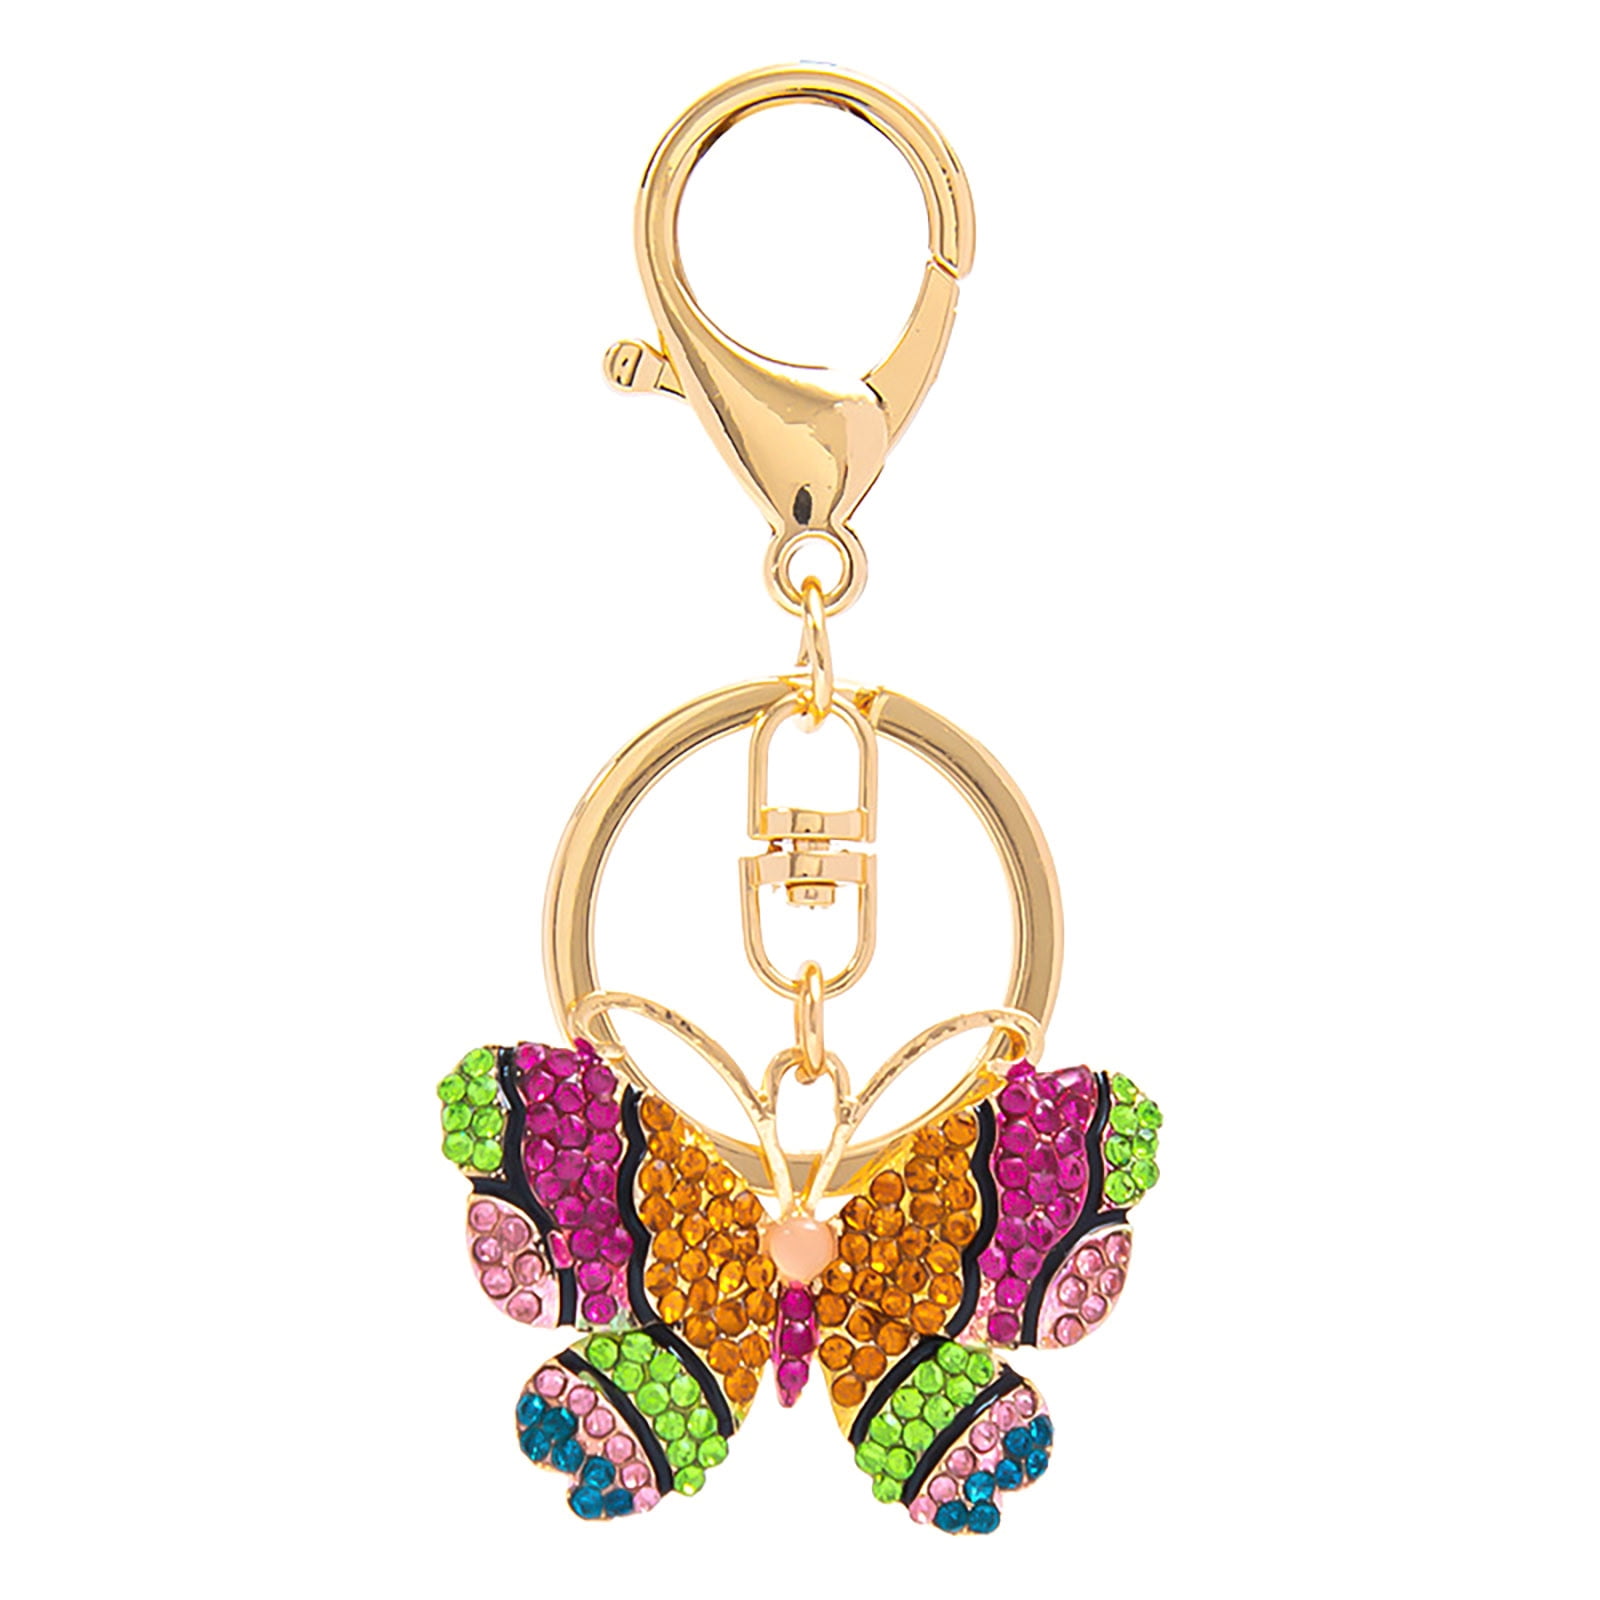 xinqinghao new exquisite diamond-studded butterfly keychain gift yellow ...